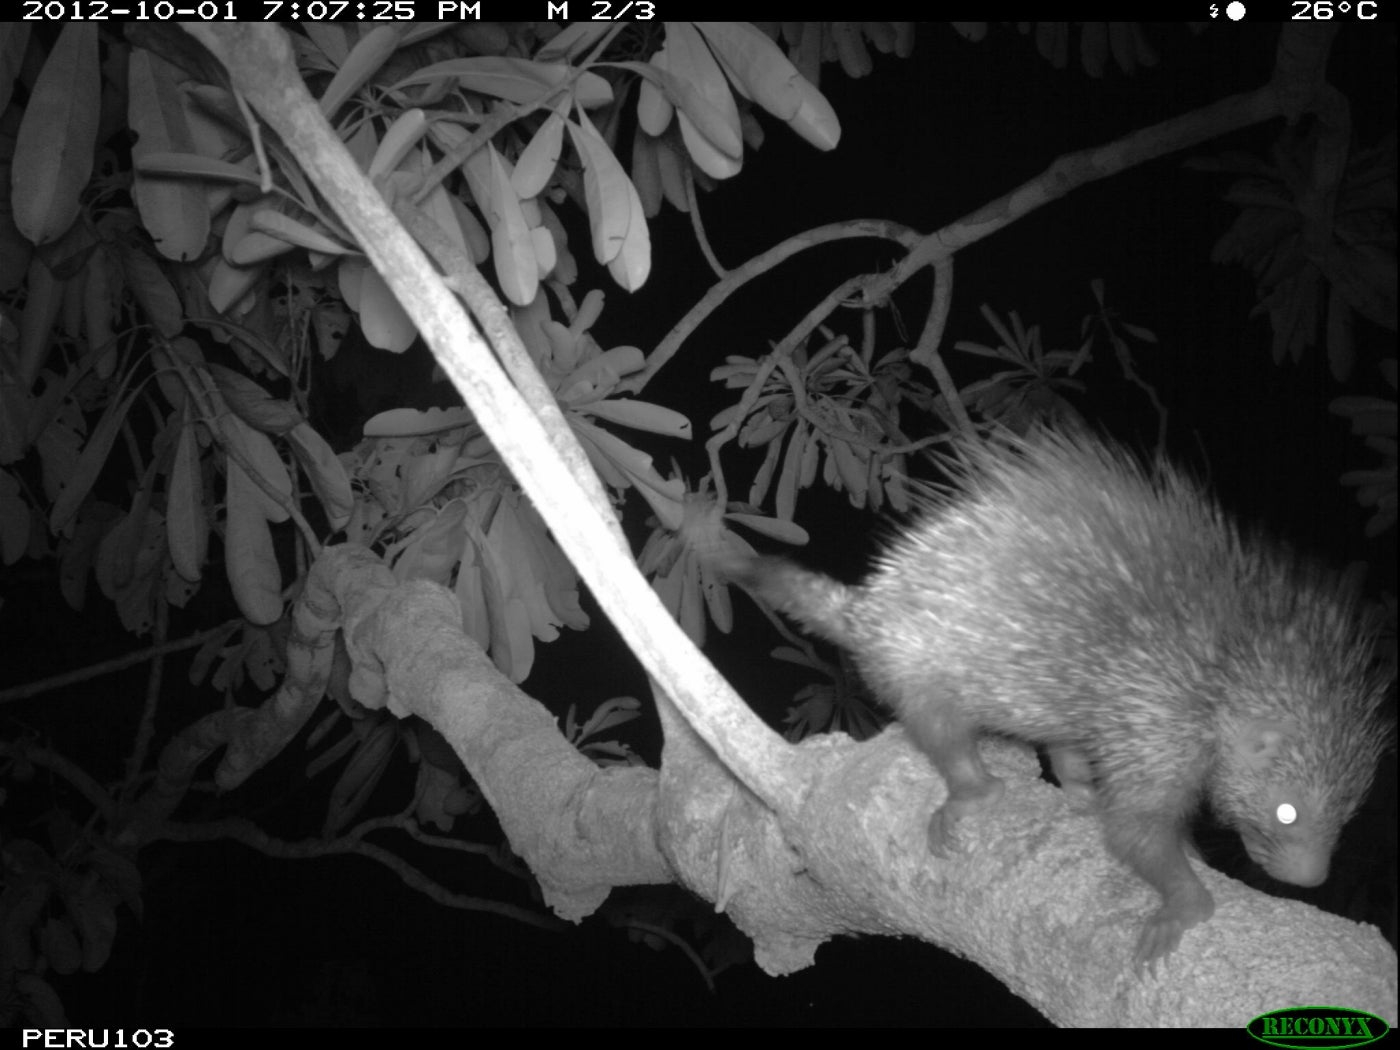 A nighttime camera trap photo of a dwarf porcupine, with spiky fur and a long tail, walking carefully across a branch high up in the rainforest canopy